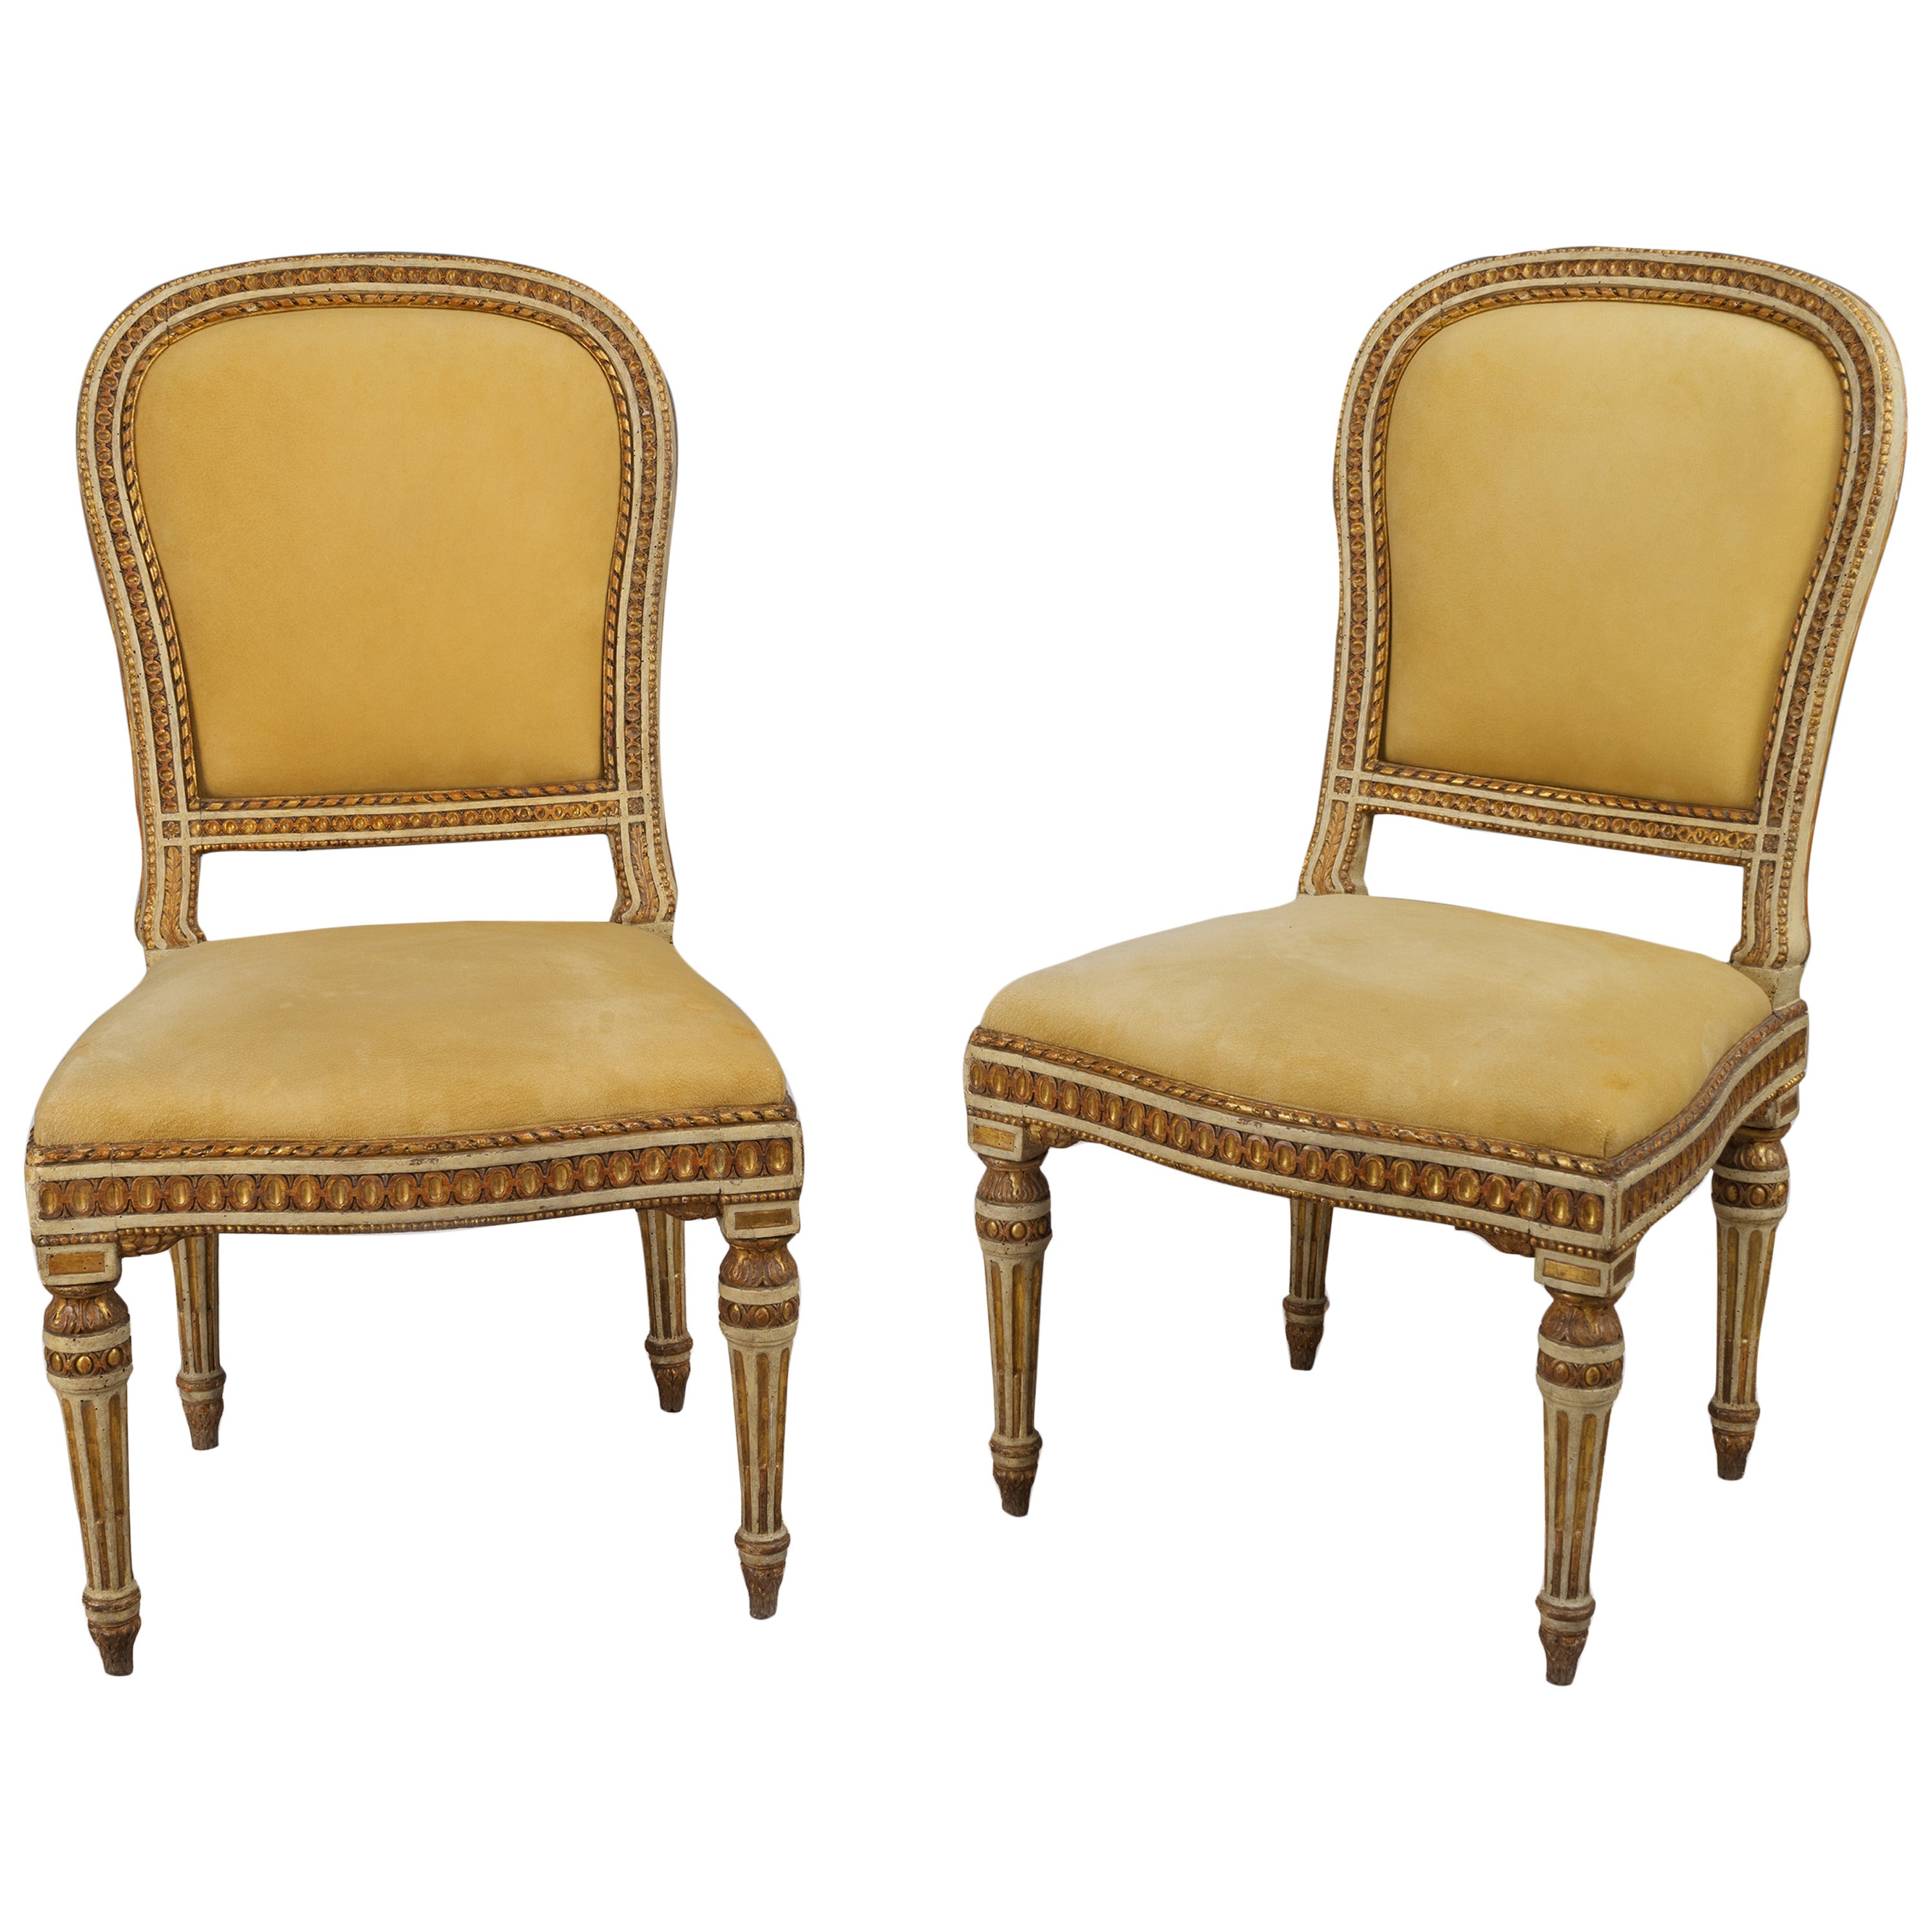 Pair of Finely Painted Italian Louis XVI Carved and Gilded Chairs For Sale